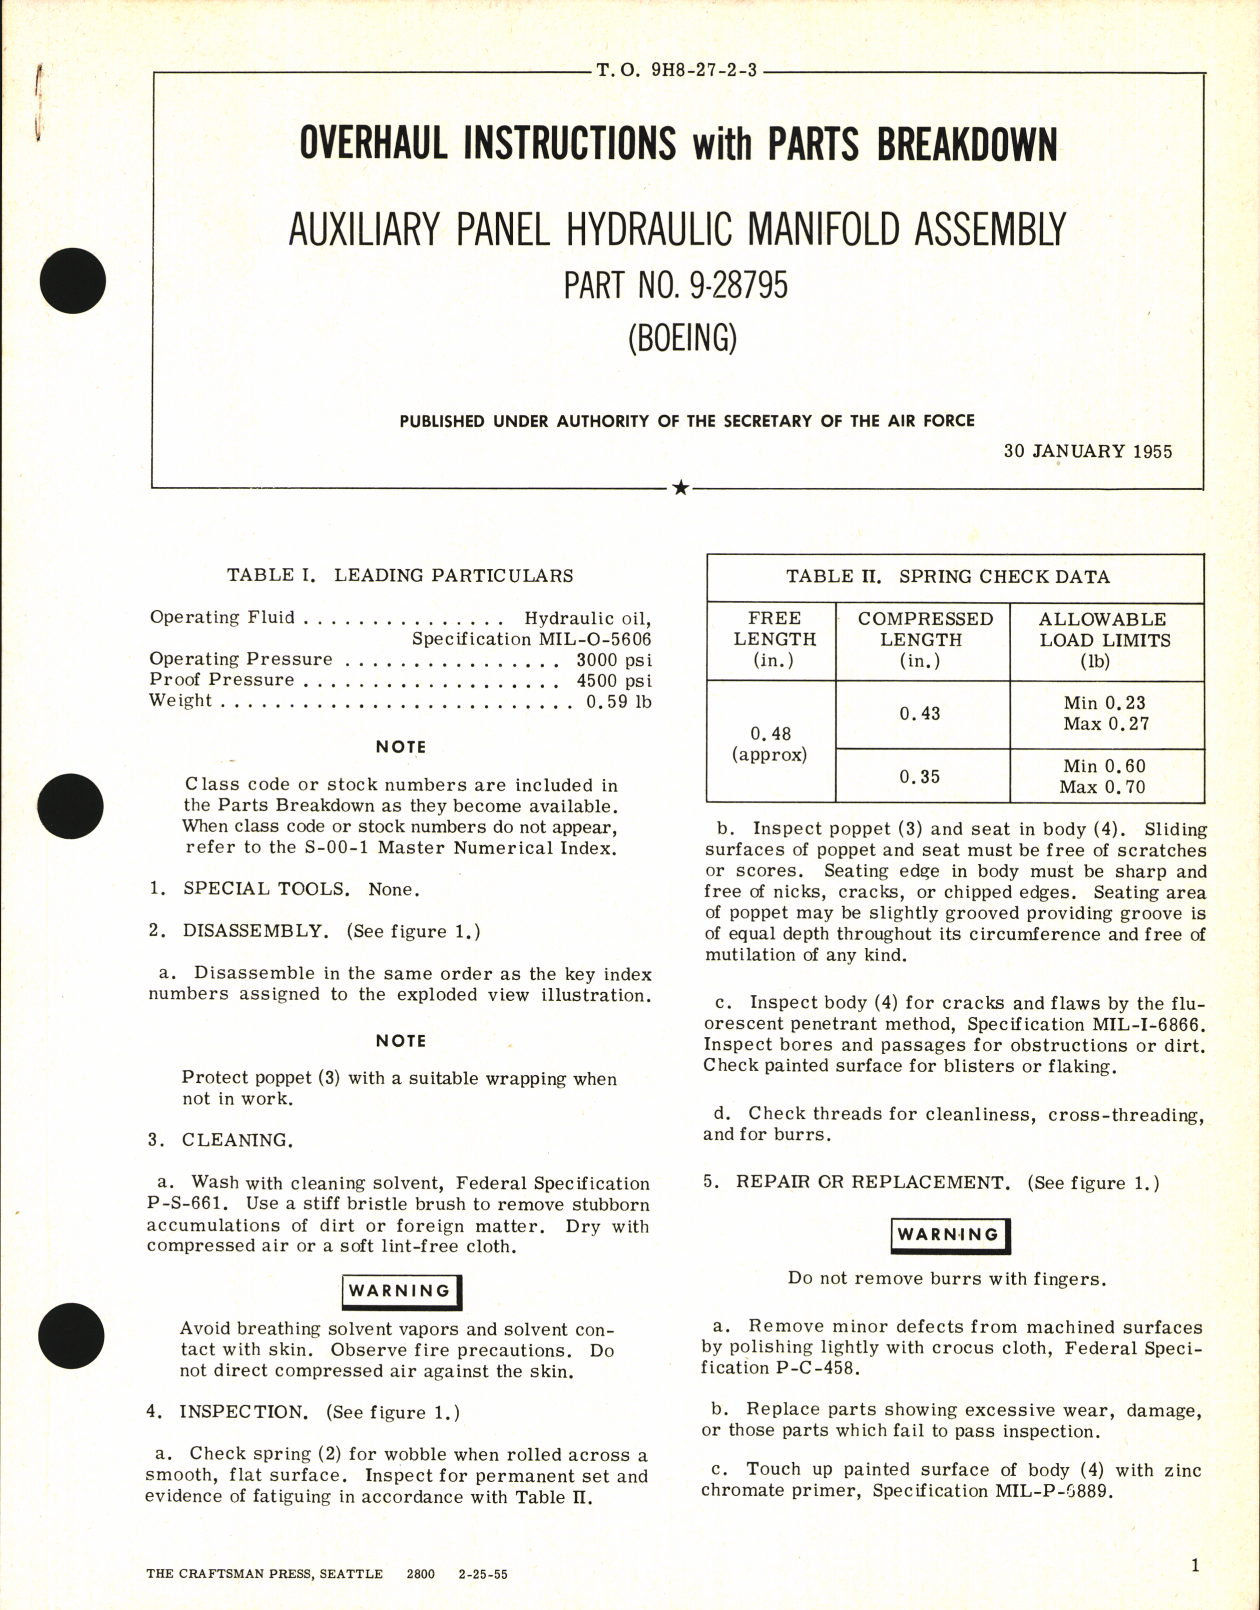 Sample page 1 from AirCorps Library document: Overhaul Instructions with Parts Breakdown for Auxiliary Panel Hydraulic Manifold Assembly Part No. 9-28795